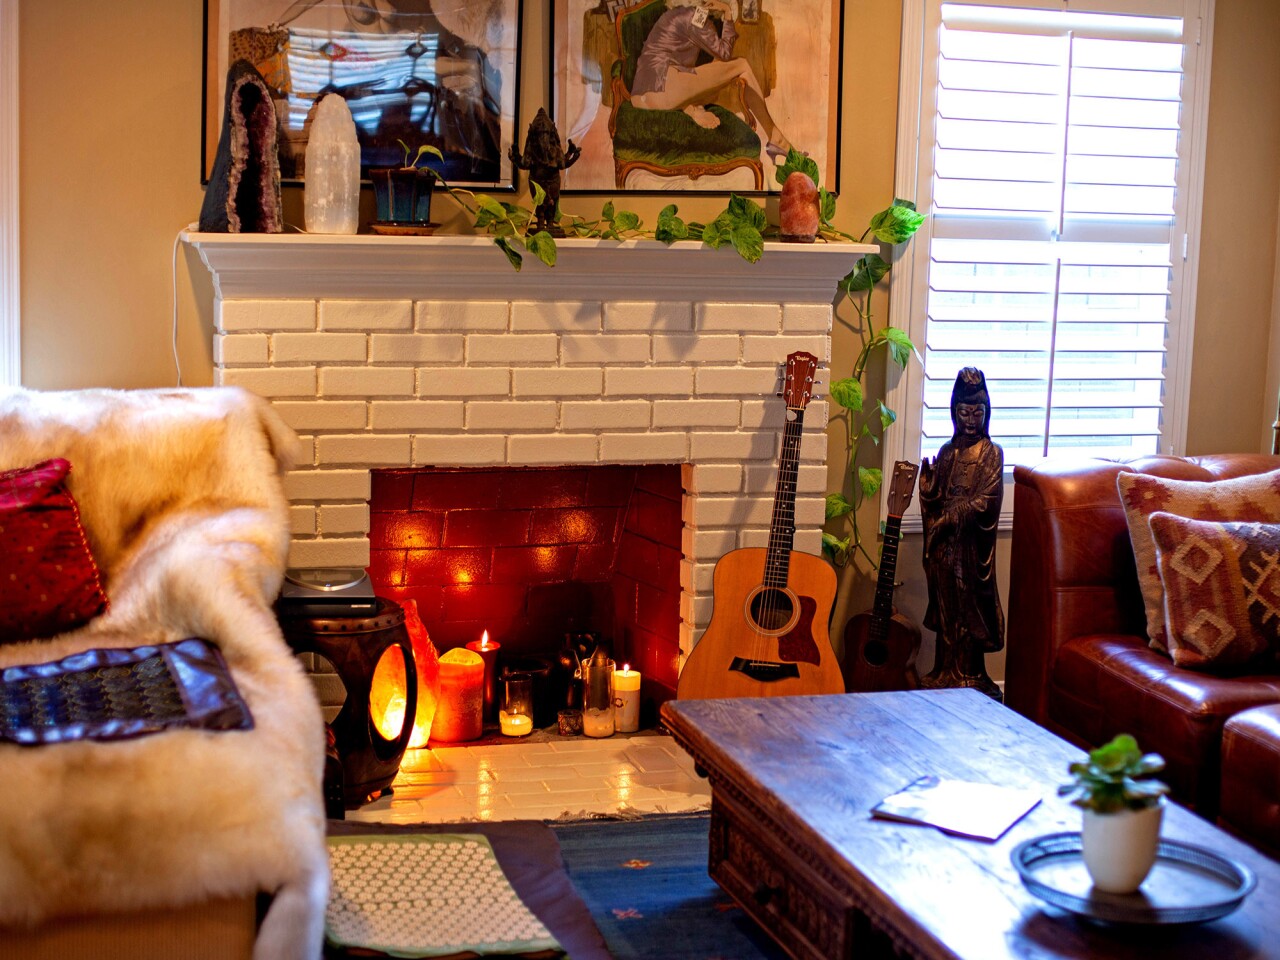 The inviting space has Buddha and Ganesh statues arrayed on shelves and pillar candles flickering in a white-brick fireplace. It harbors his Taylor guitar and upright piano, as well as a snowy faux-fur throw atop a deep sofa, in a soothing cognac shade.